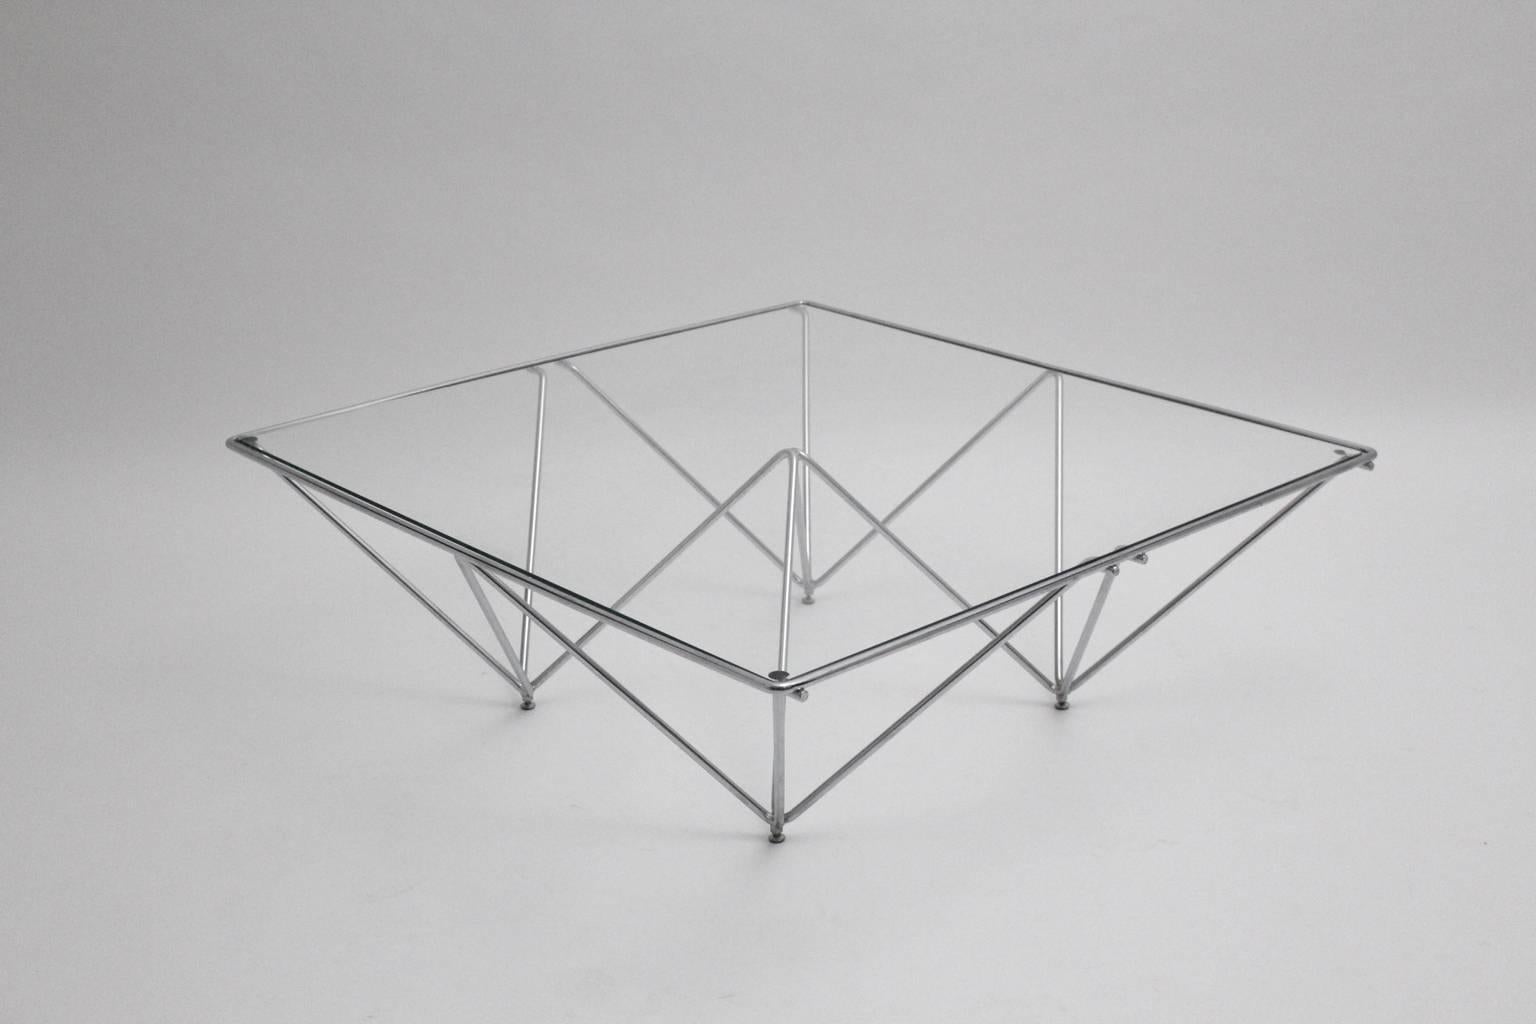 Late 20th Century Modern Vintage Metal Glass Coffee Table Sofa Table Paolo Piva Style Italy 1980s For Sale